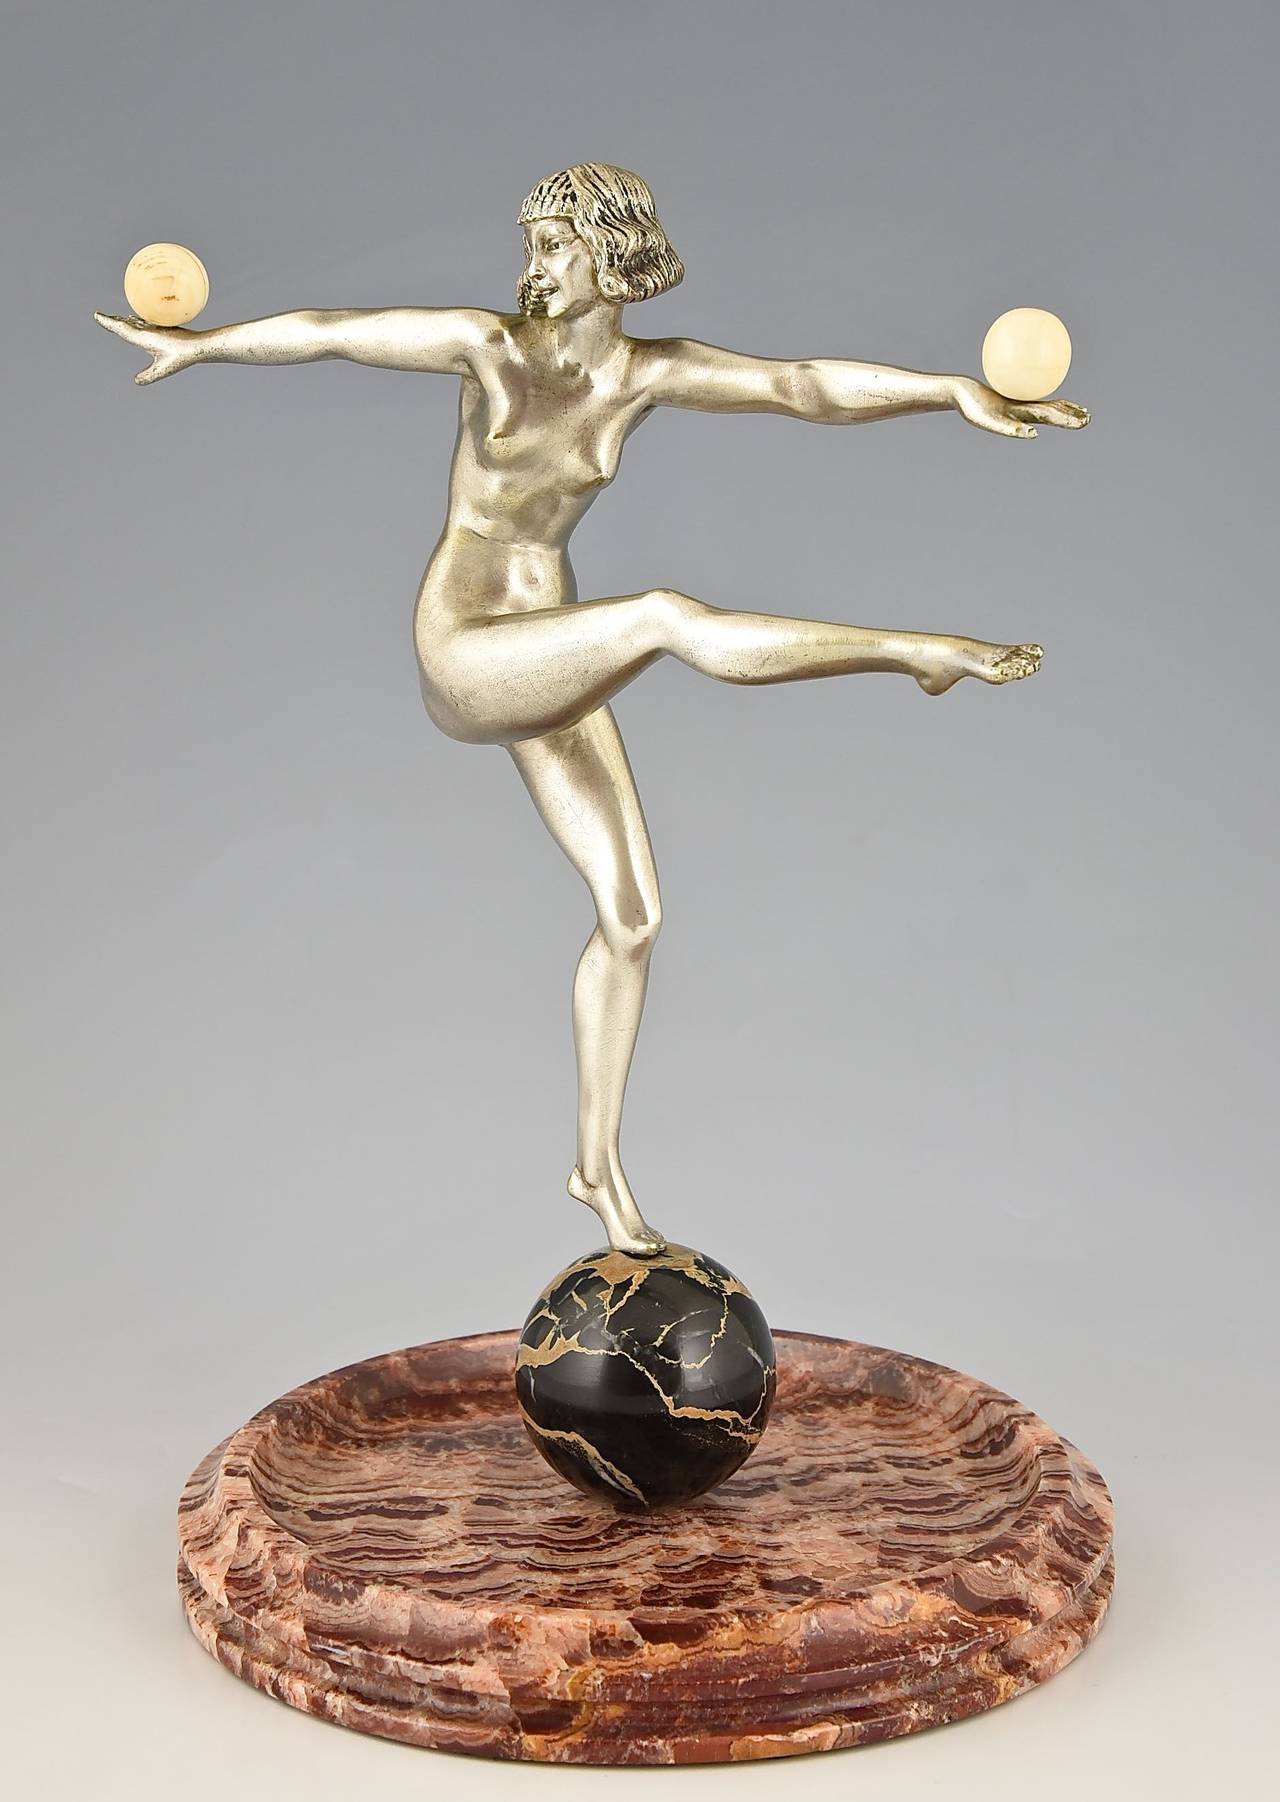 Art Deco bronze sculpture of a nude dancer by Pierre Le Faguays.
Signature: Le Faguays on the marble ball. 
Style: Art Deco.
Date:  circa 1925-1930.

Material: Silvered bronze.  Marble tray. 
Origin:  France. 
Size:
 H. 12.8 inch x L. 9.4